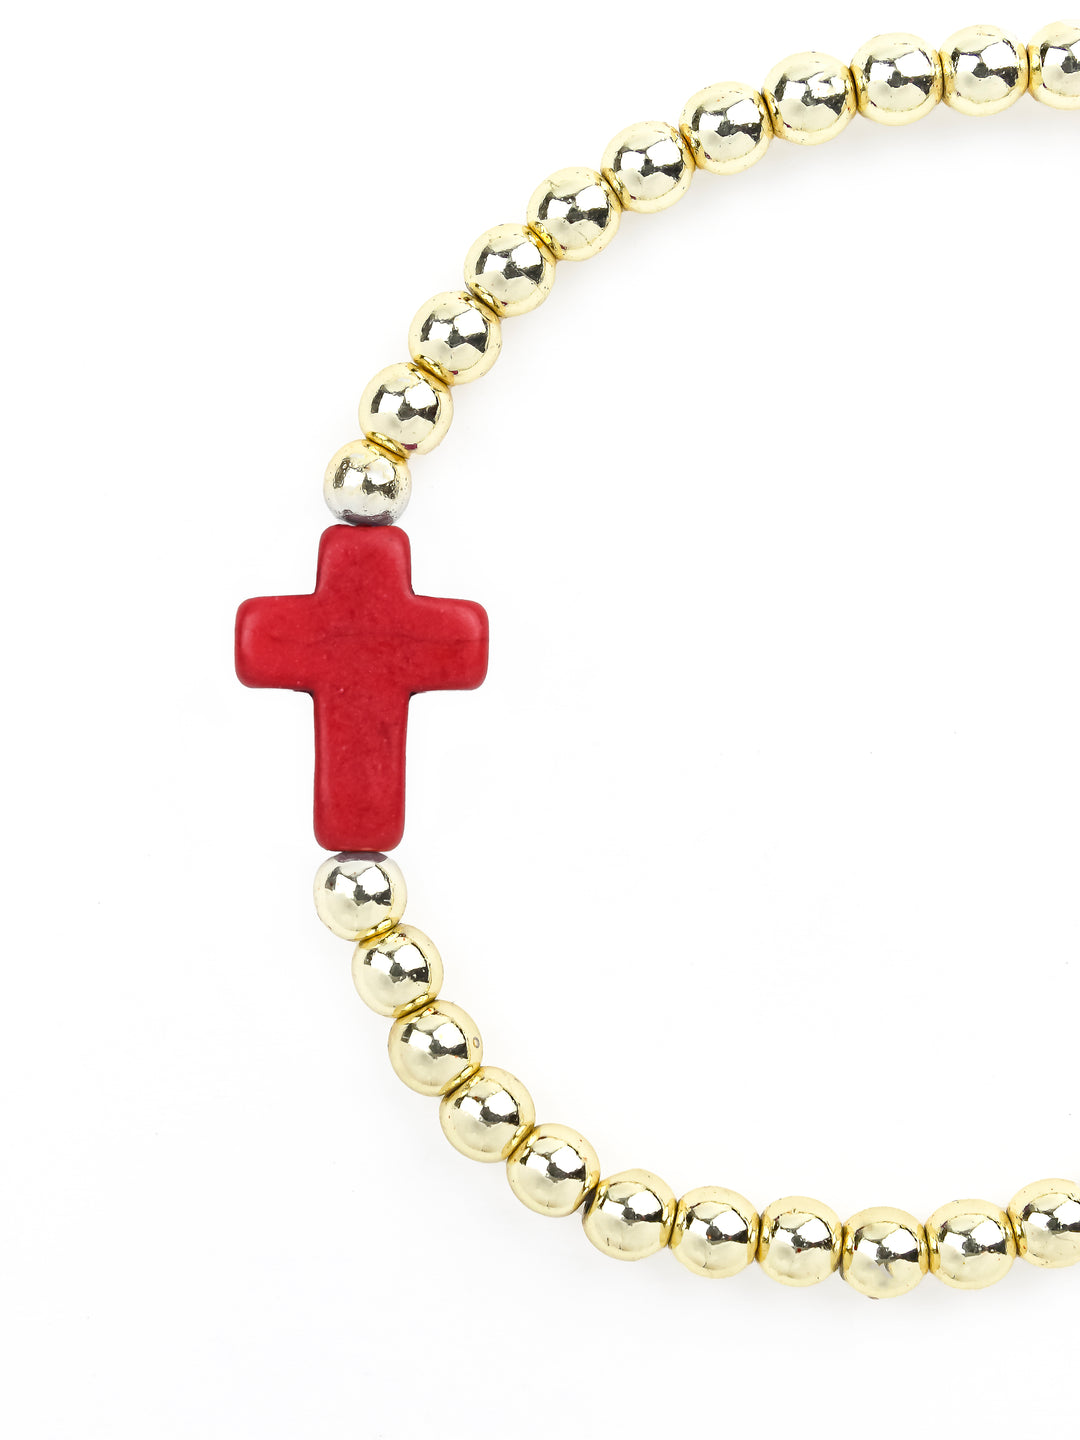 Cross Bracelet Gold/Red Teen- Designed to Fit Wrists Up to 6.5